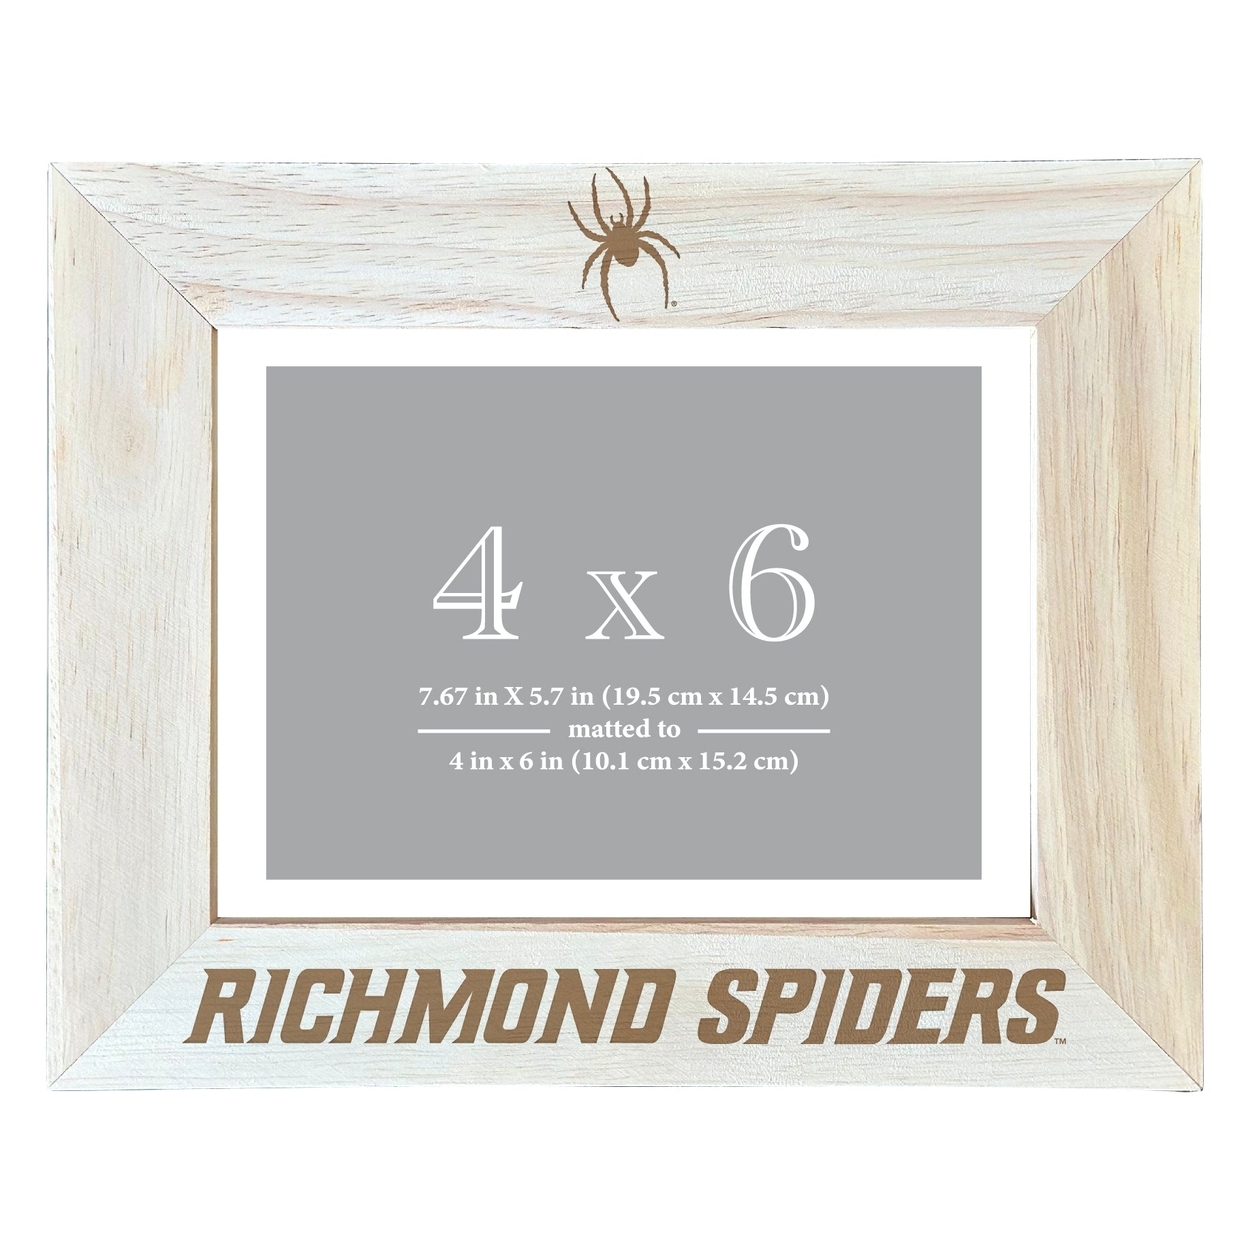 Richmond Spiders Wooden Photo Frame Matted To 4 X 6 Inch - Etched